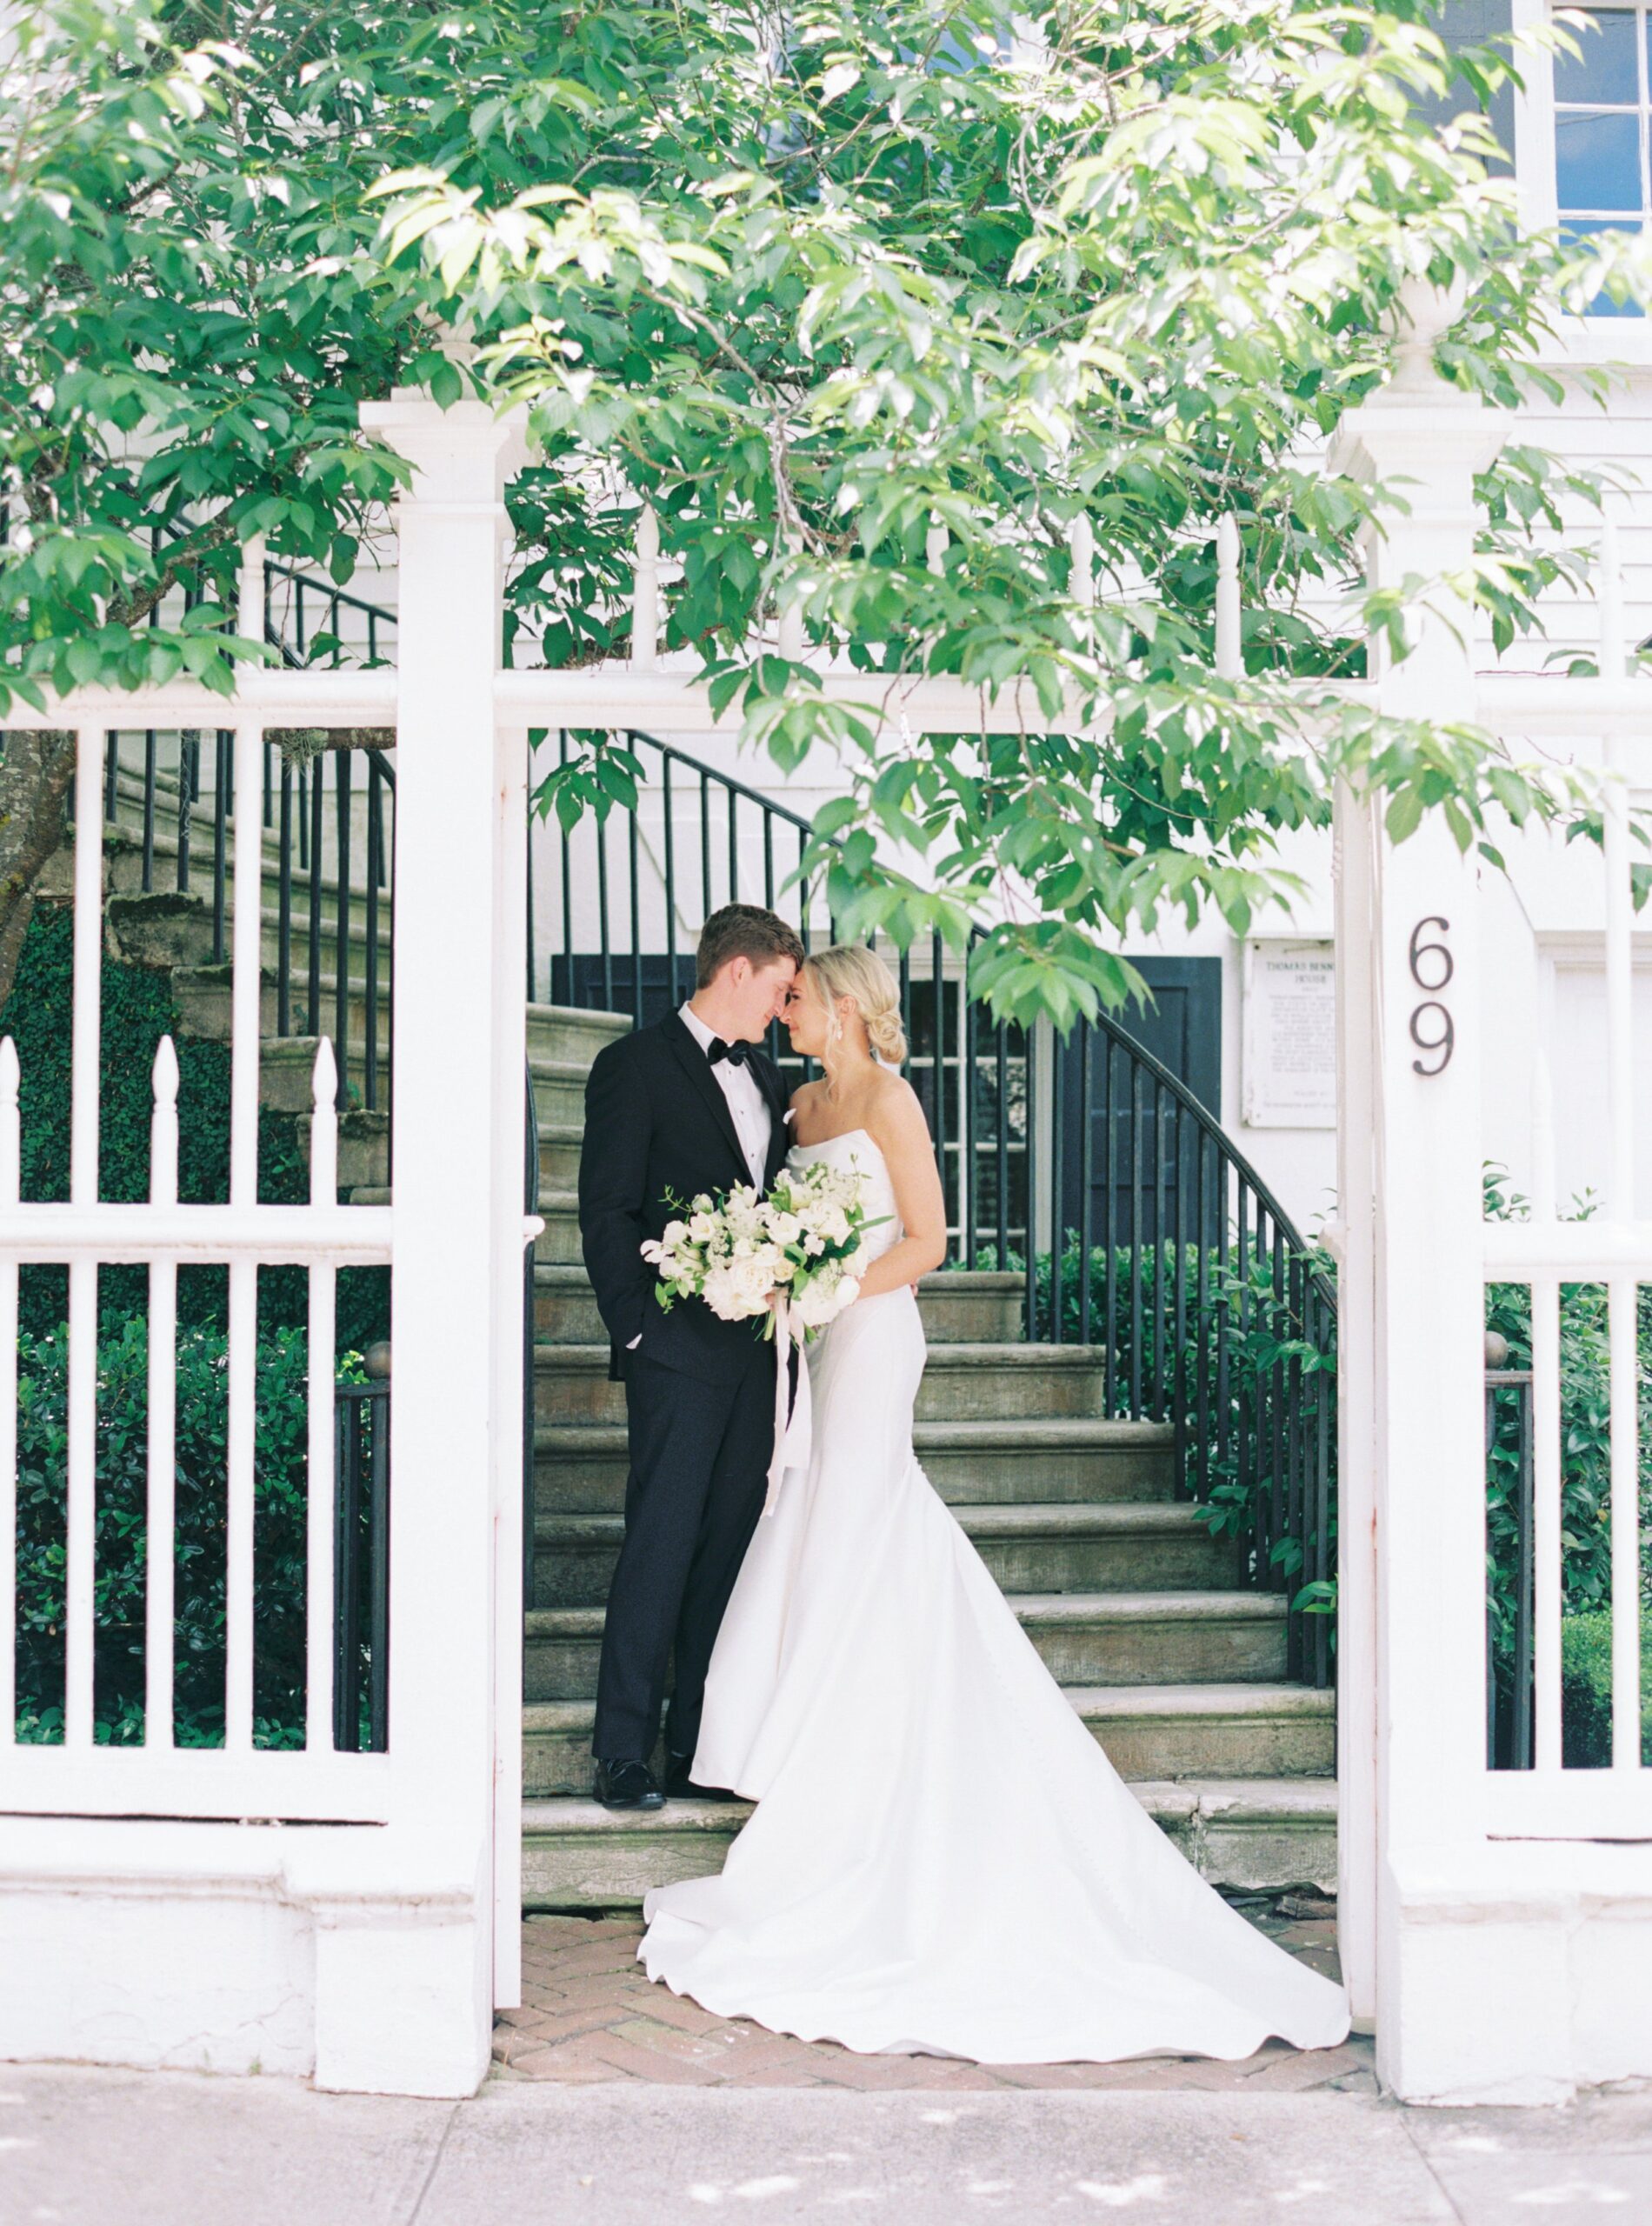 Governor Thomas Bennett House front steps with greenery. Spring bride and groom. Charleston weddings.